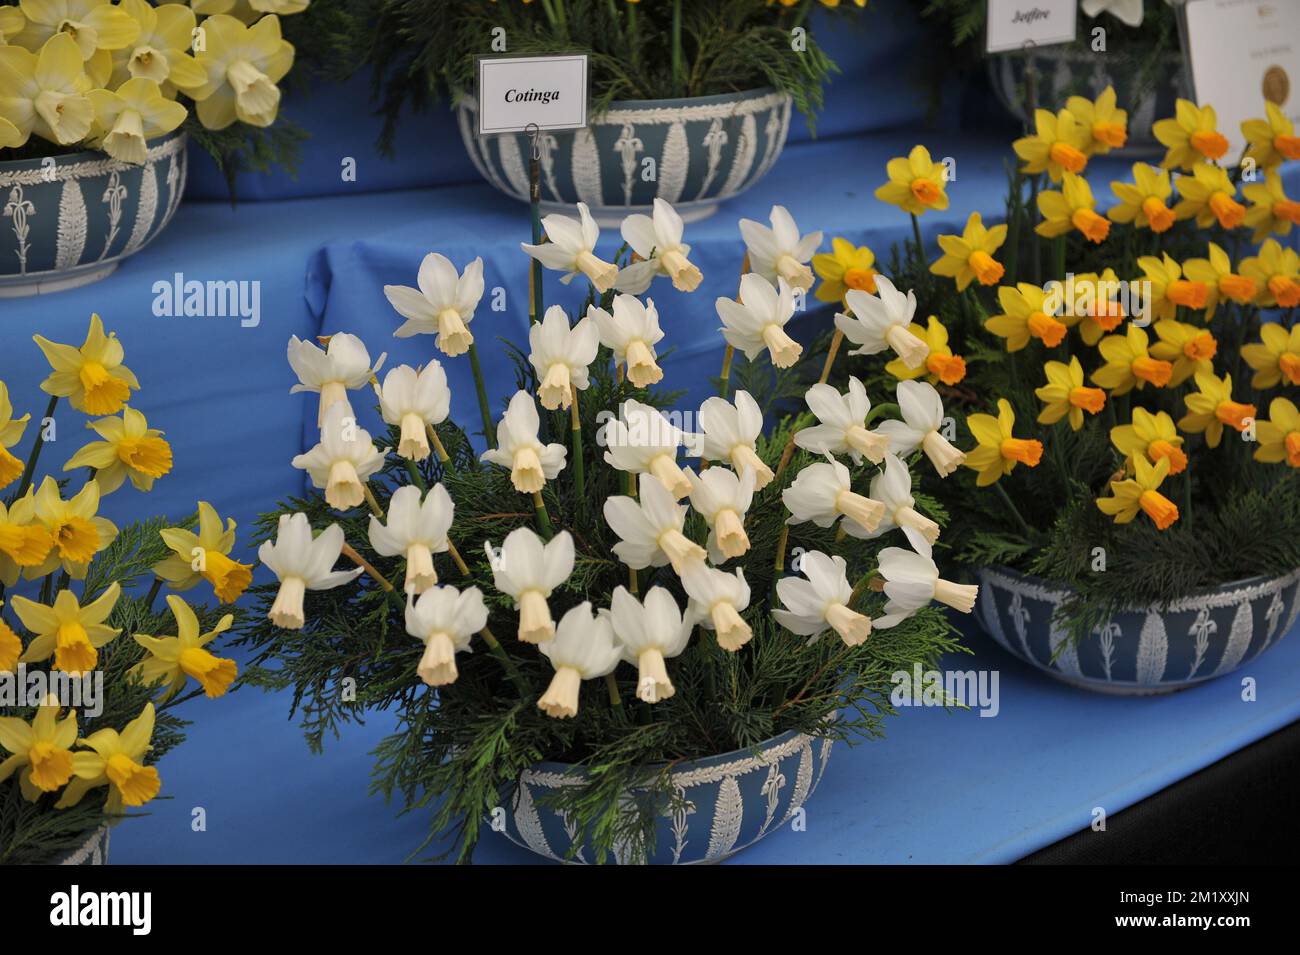 A bouquet of white and pink Cyclamineus daffodils (Narcissus) Cotinga on an exhibition in May Stock Photo